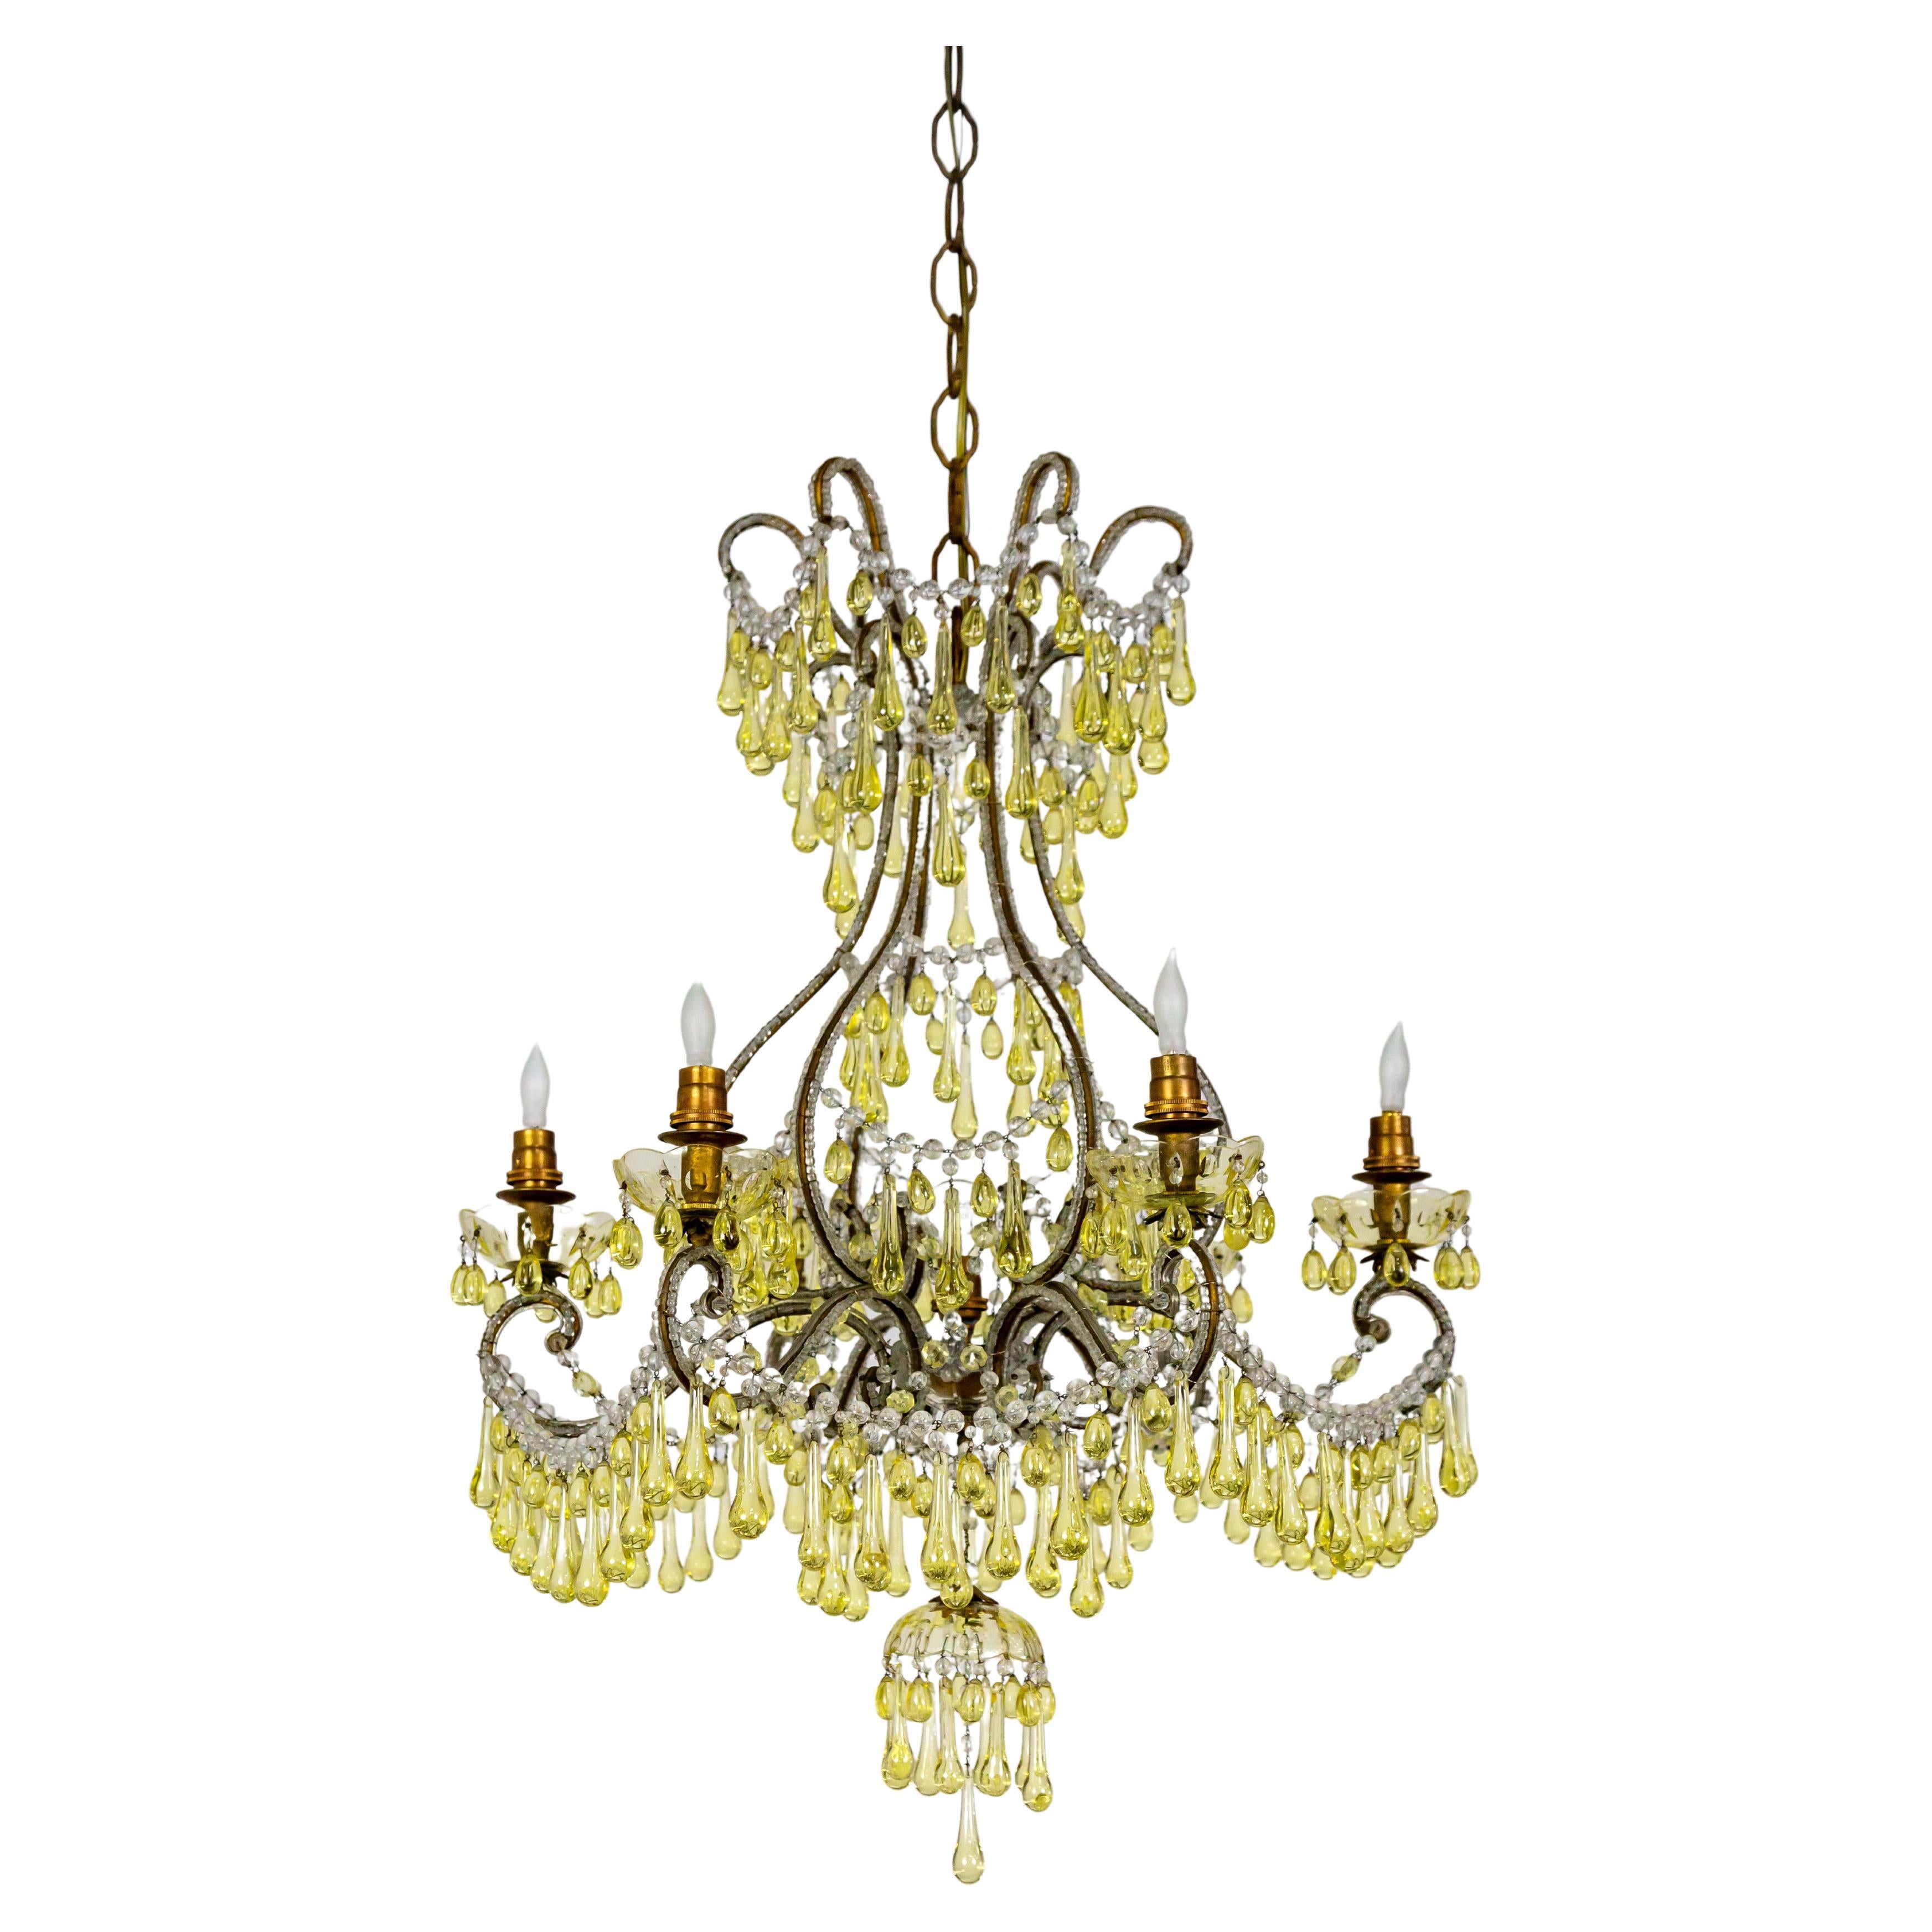 19th Century Rare Pale Yellow Crystal Drops Birdcage Chandelier